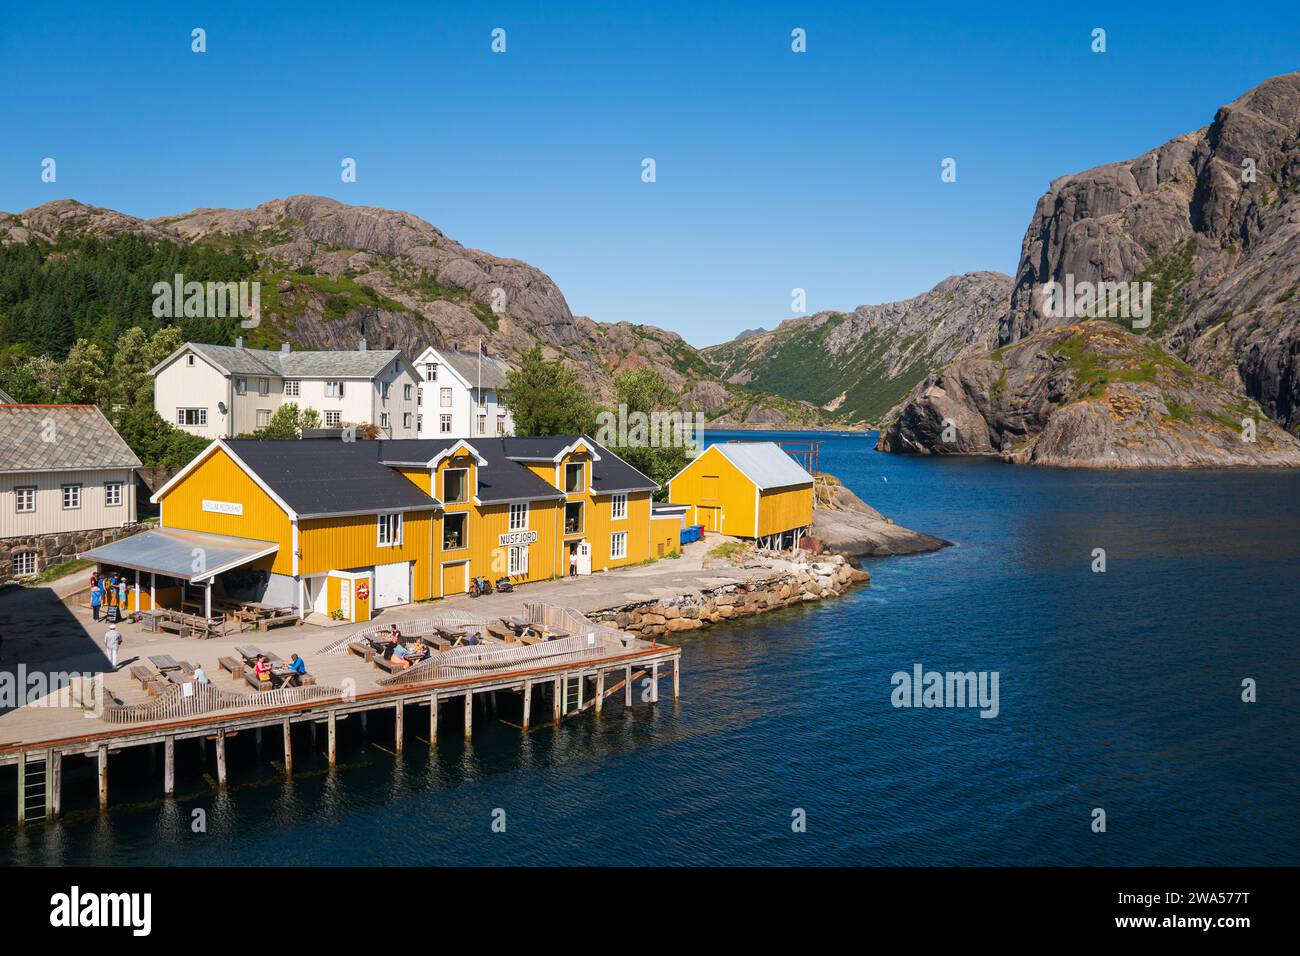 The small village of Nusfjord on the southern coast of Lofoten, on a bright summer day, fishing boats and sailboats alongside colorful houses. Stock Photo